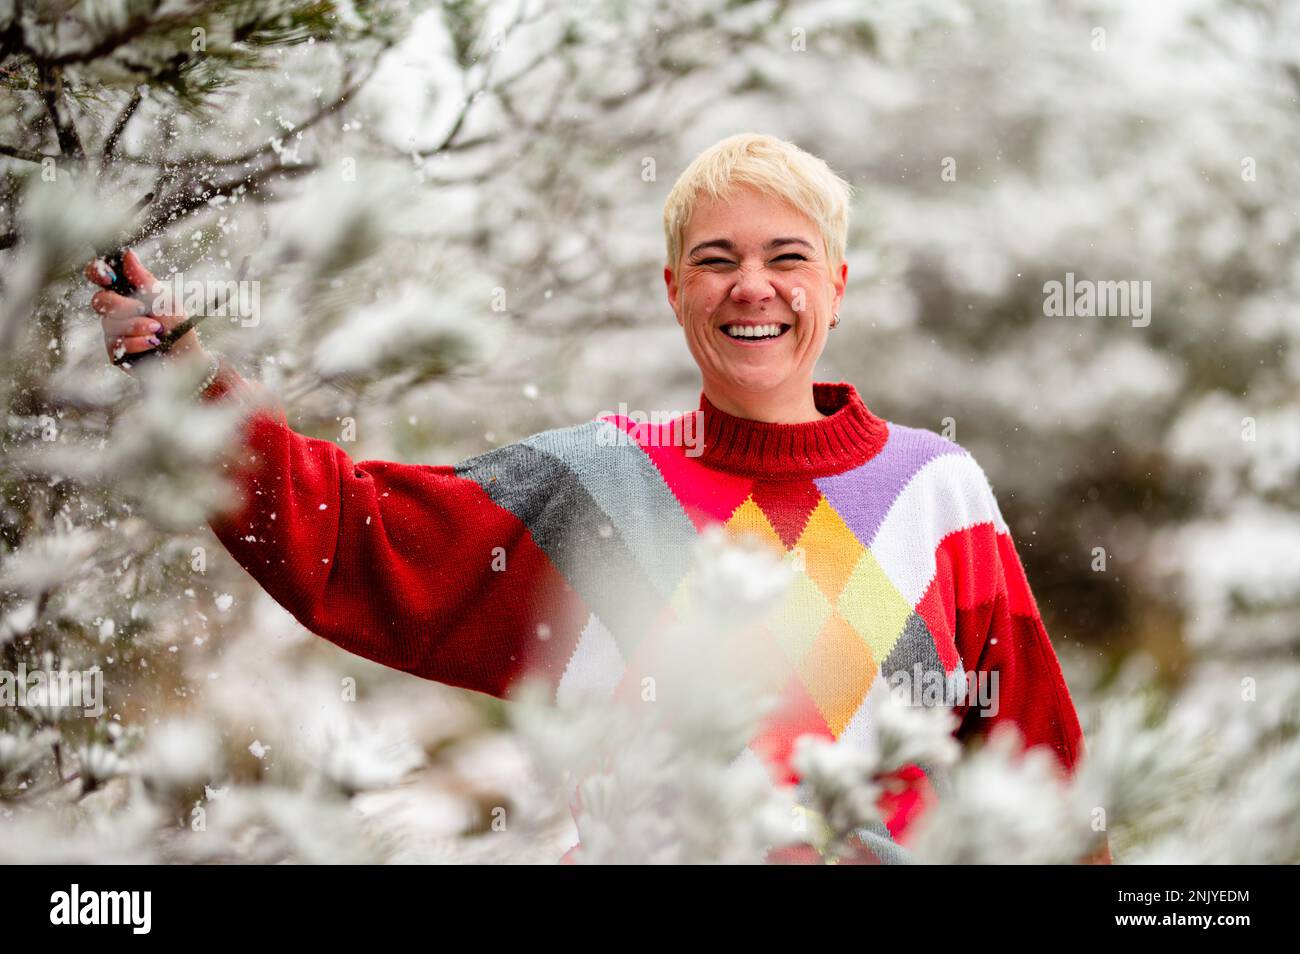 Happy adult blond haired female in warm sweater smiling and looking at camera while shaking snowy tree branch during winter holidays Stock Photo